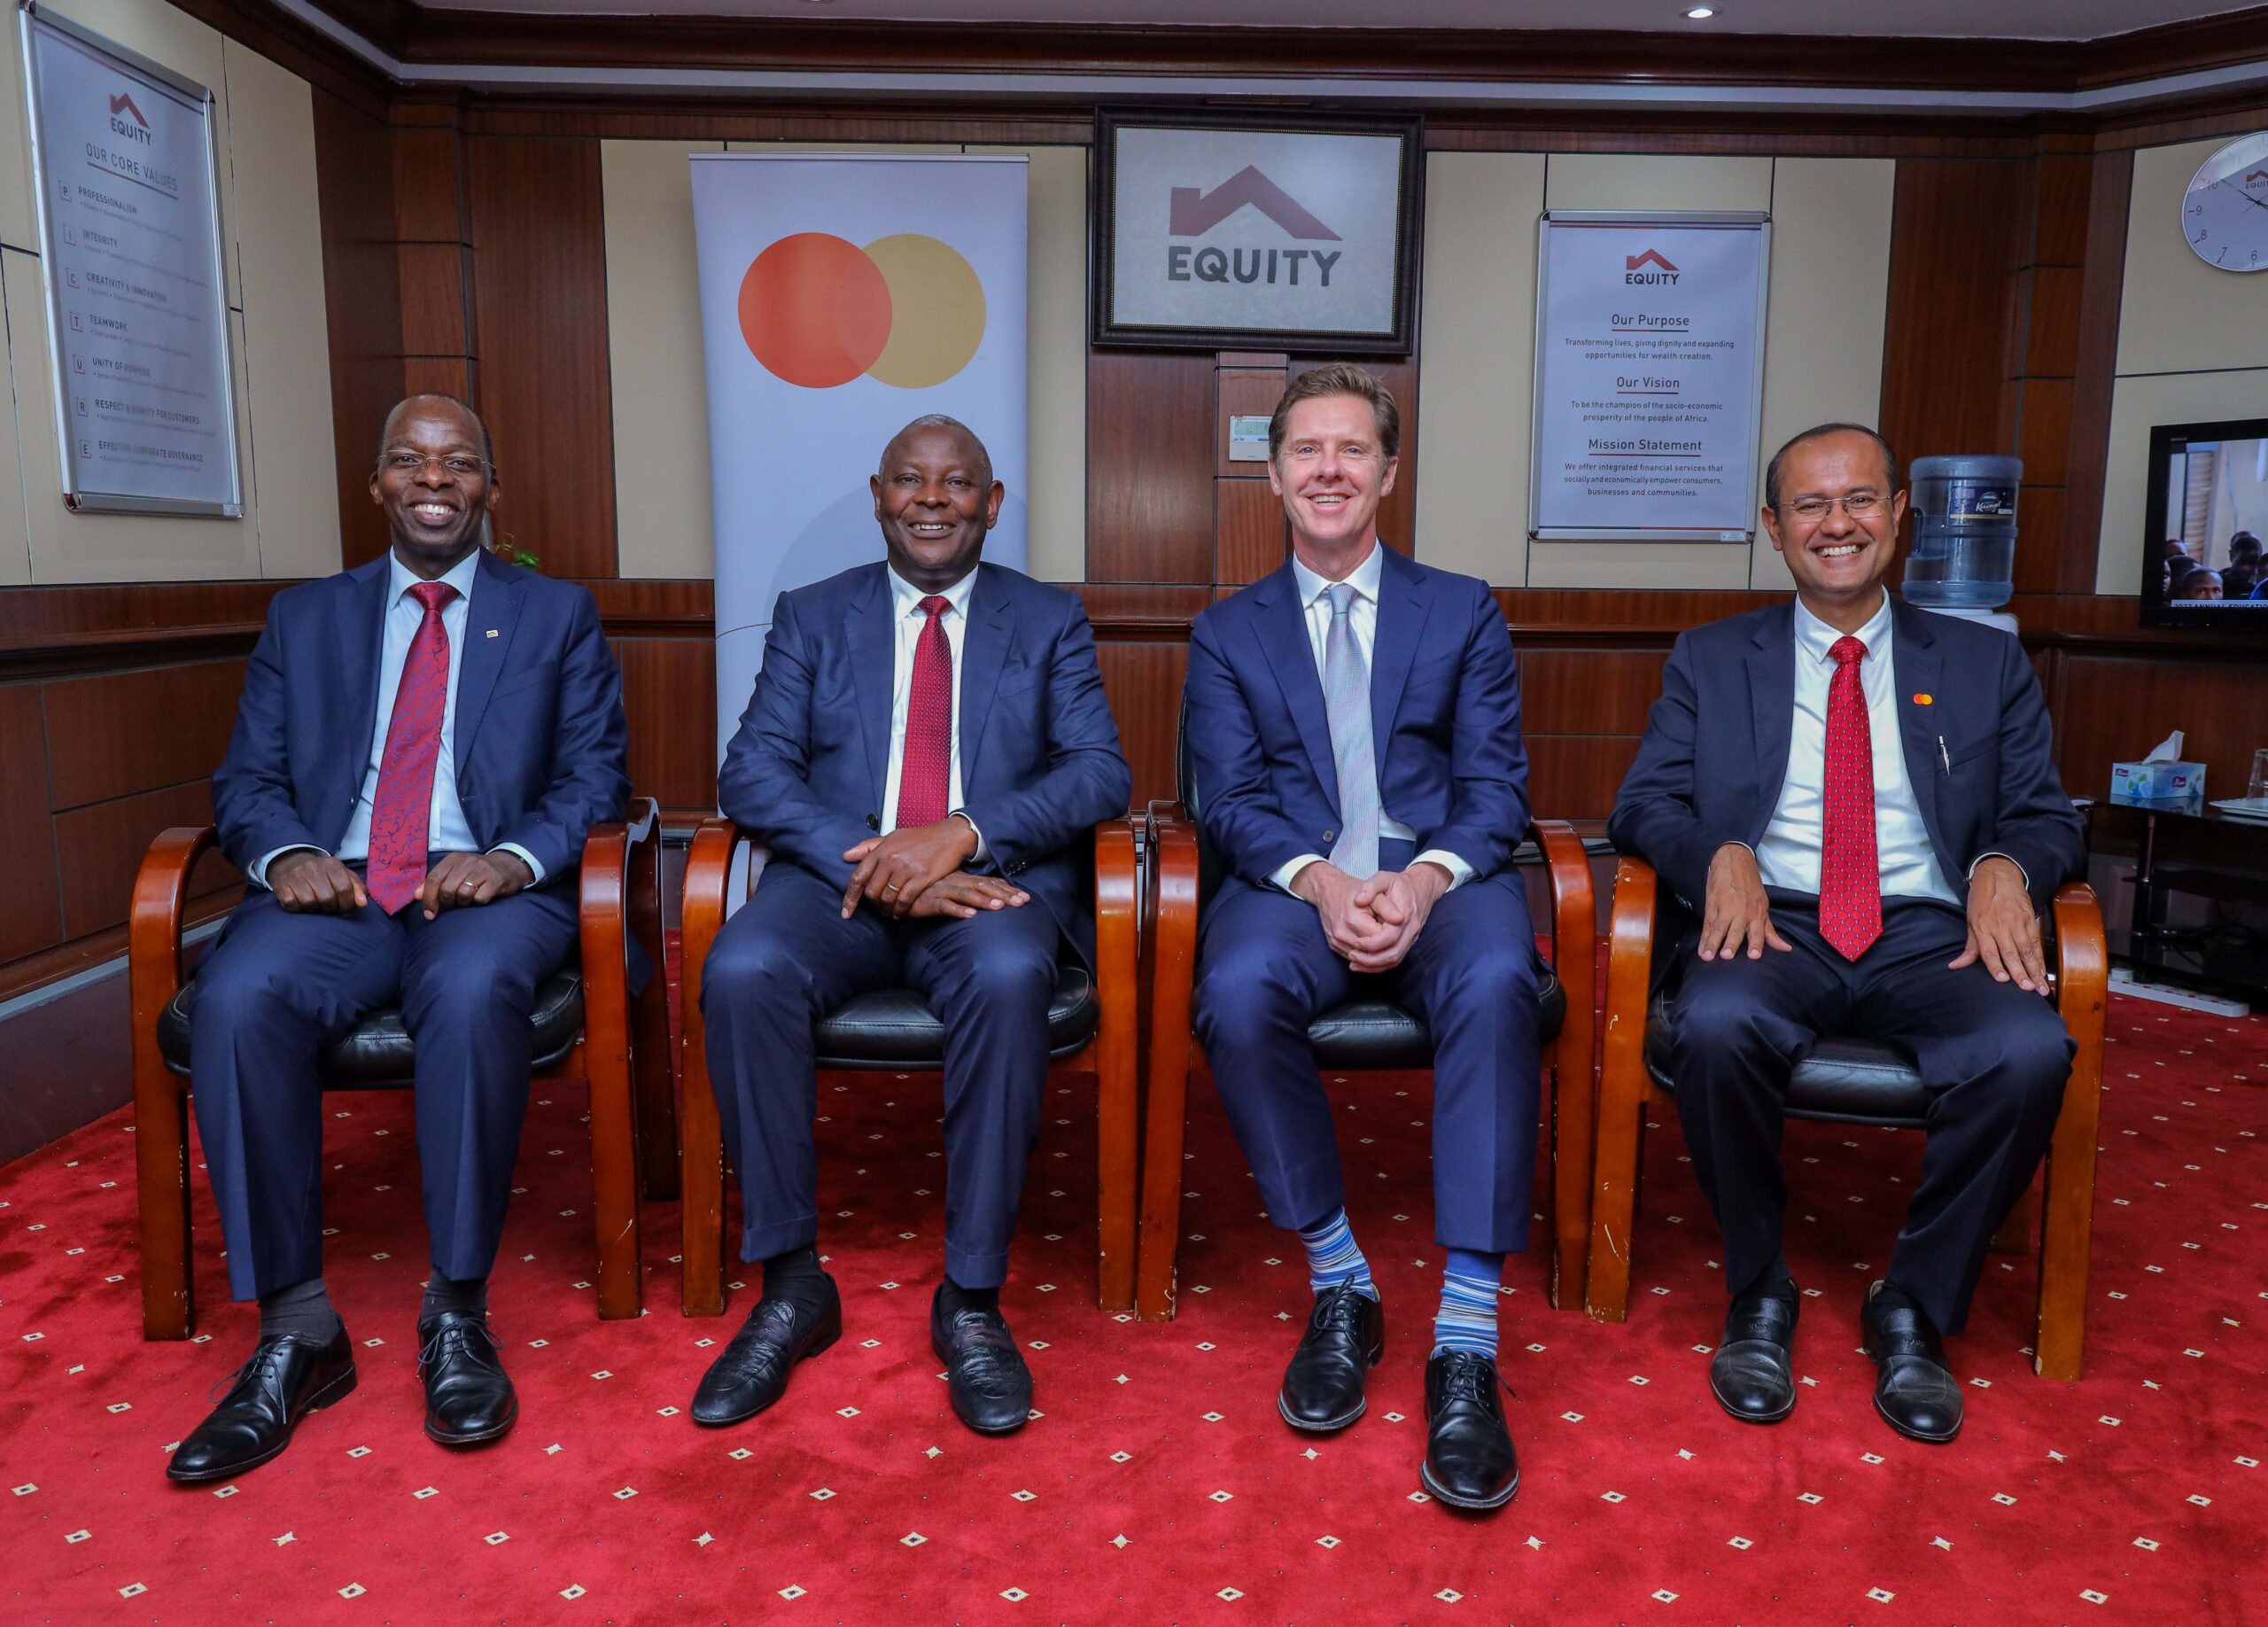 From left Samuel Makome, Equity Group Chief Commercial Officer, Dr. James Mwangi, Equity Group Managing Director and CEO, Mark Elliott, Division President for Sub Saharan Africa at Mastercard and Shehryar Ali, Senior Vice President - Country Manager for East Africa at Mastercard. PHOTO/Equity.